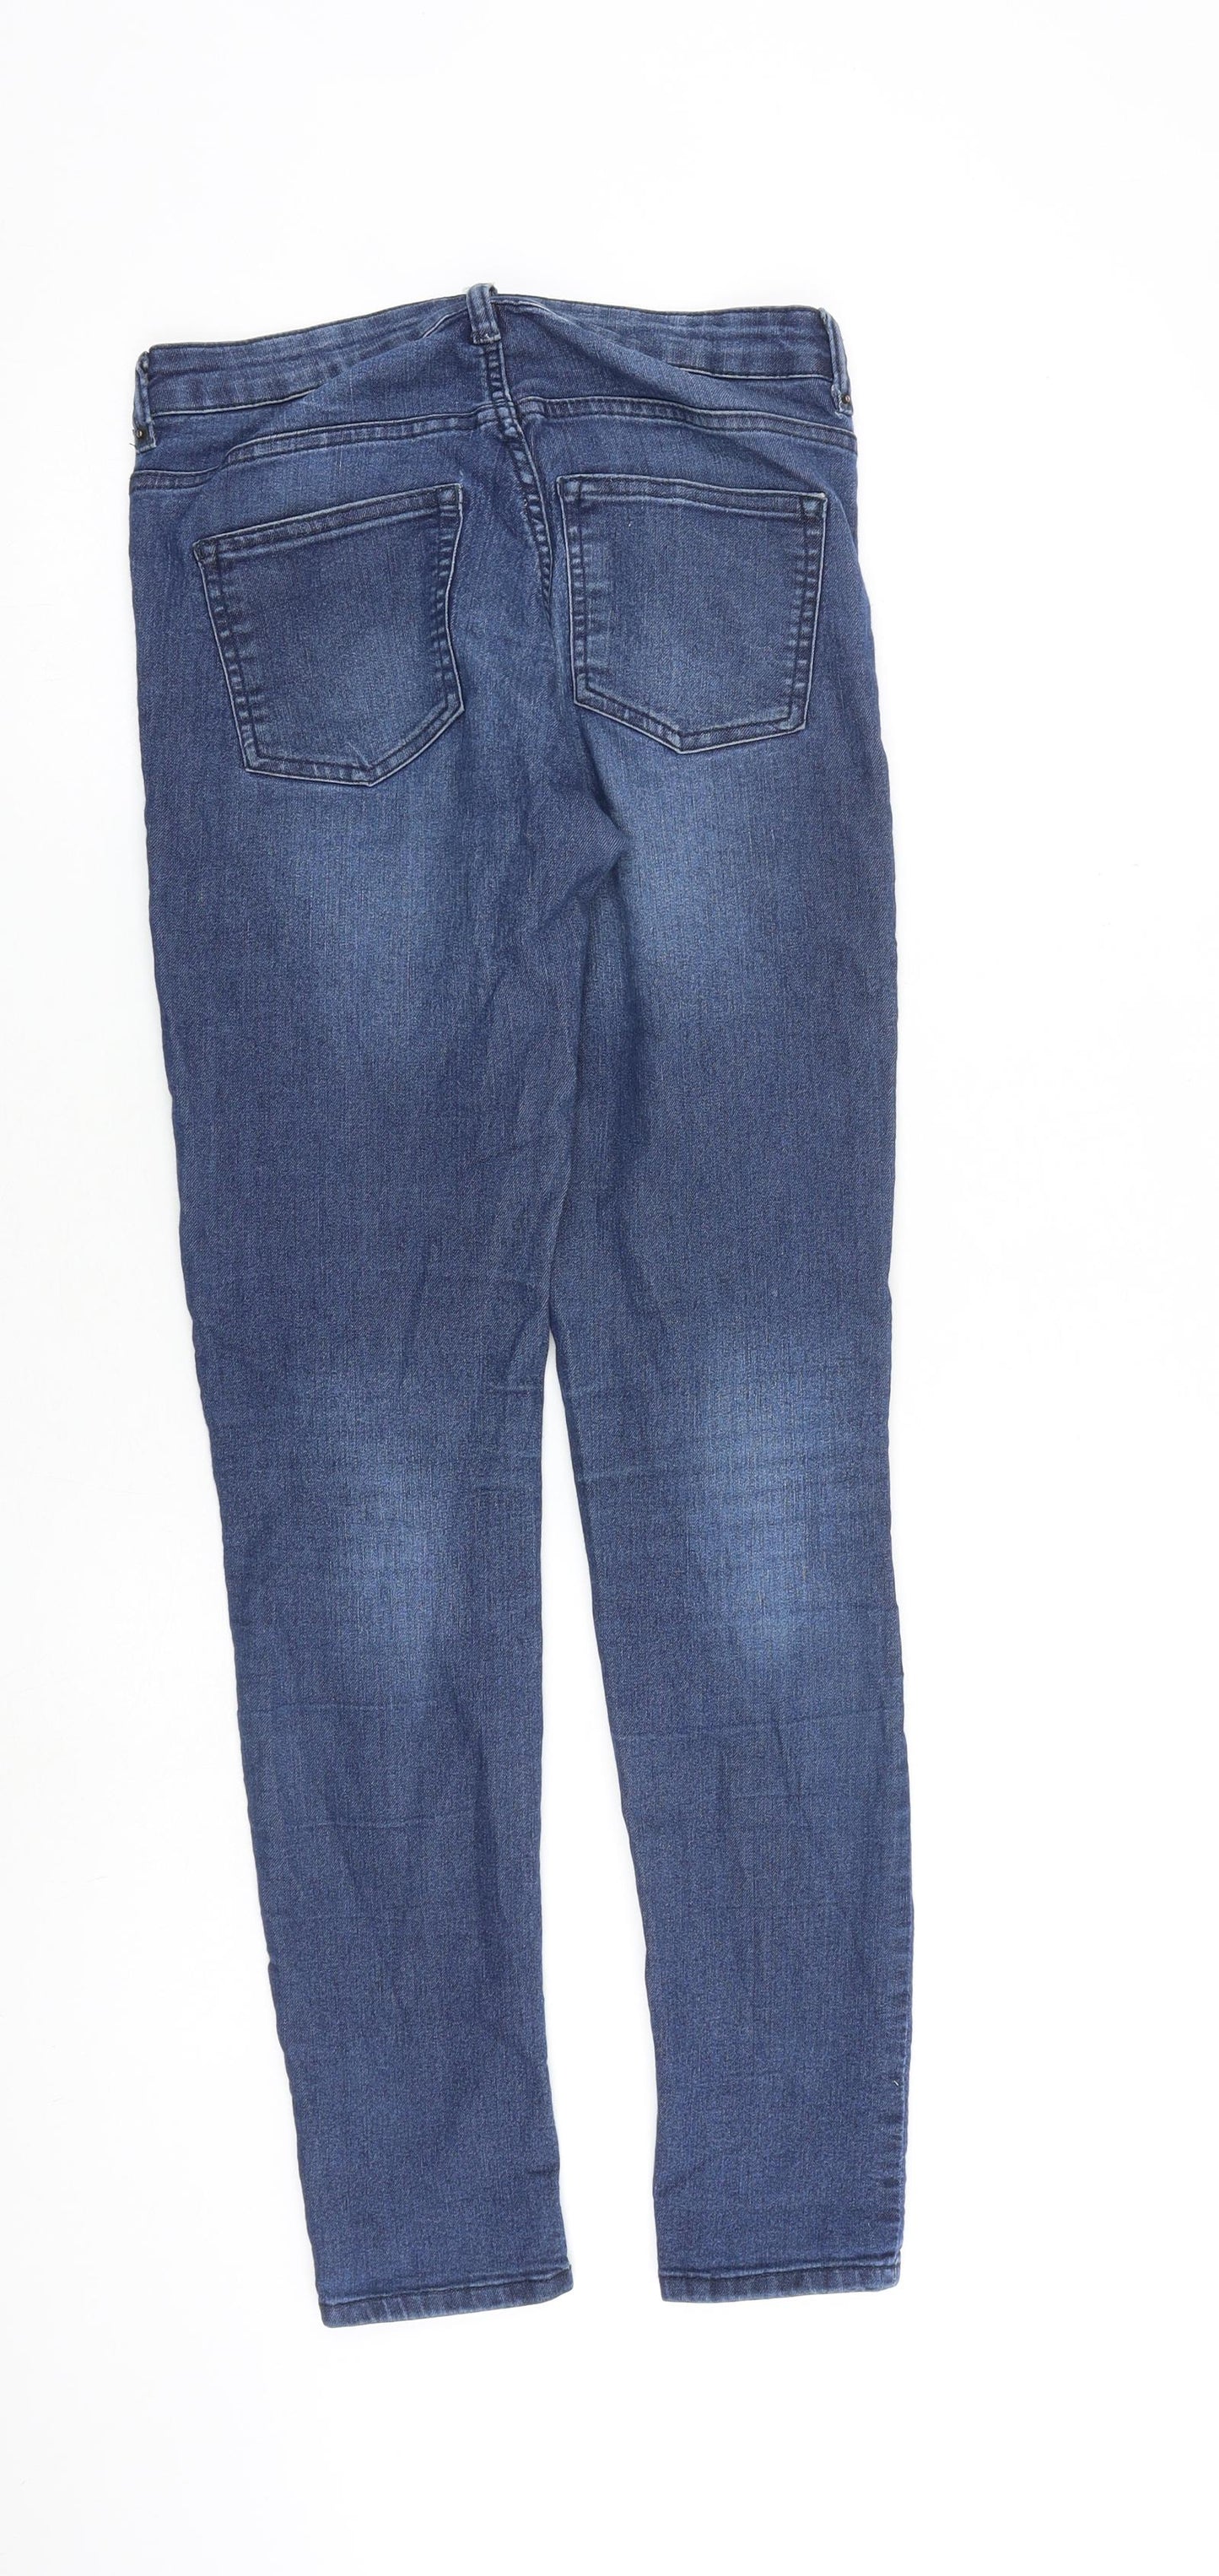 H&M Womens Blue Cotton Skinny Jeans Size 6 L30 in Regular Zip